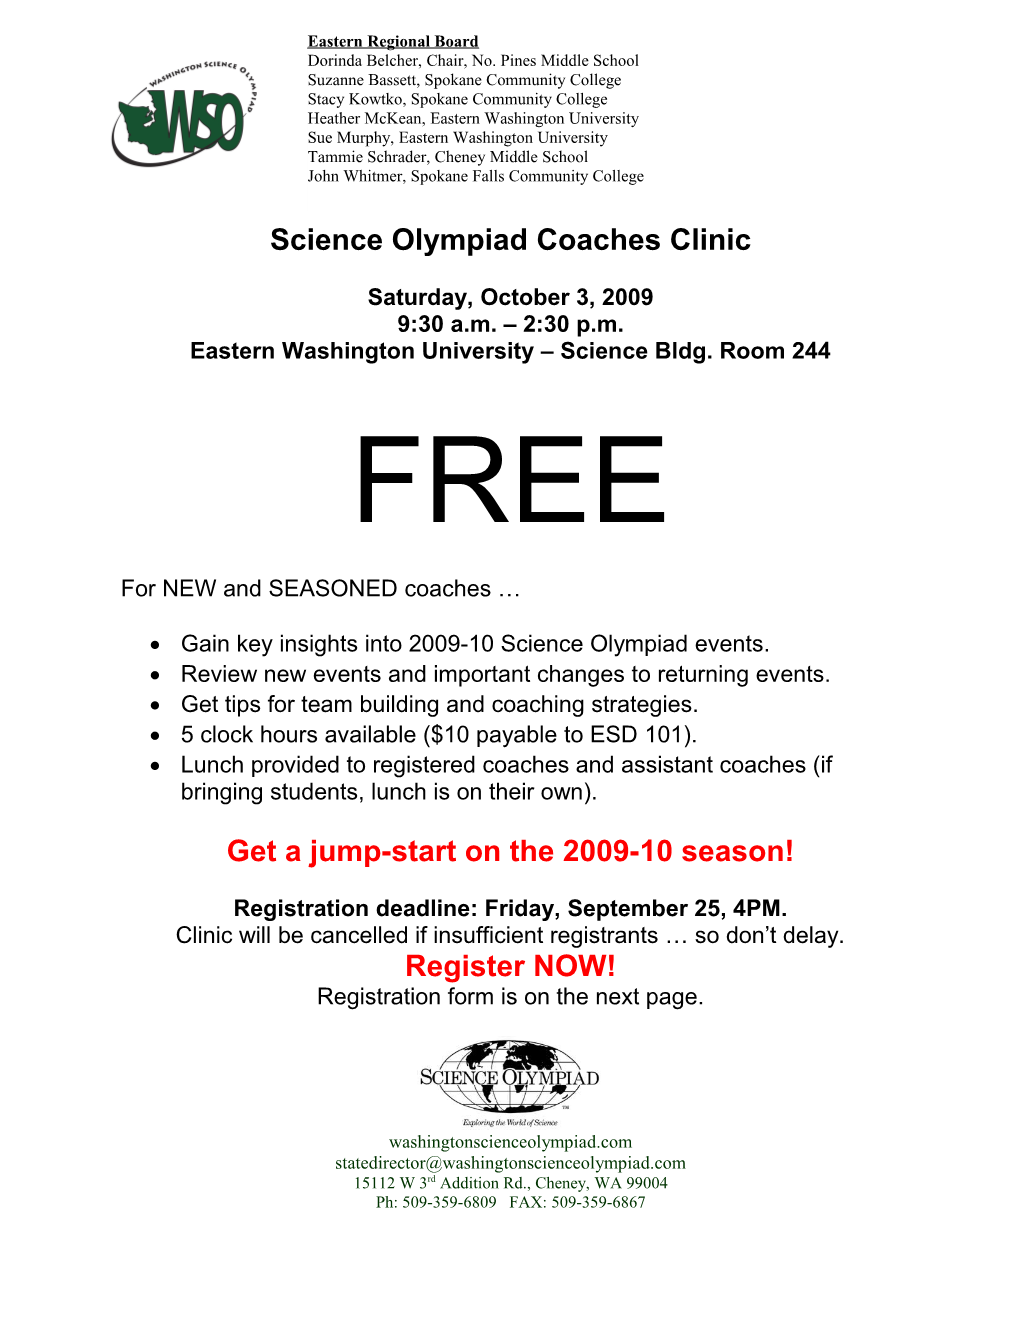 Science Olympiad Coaches Clinic